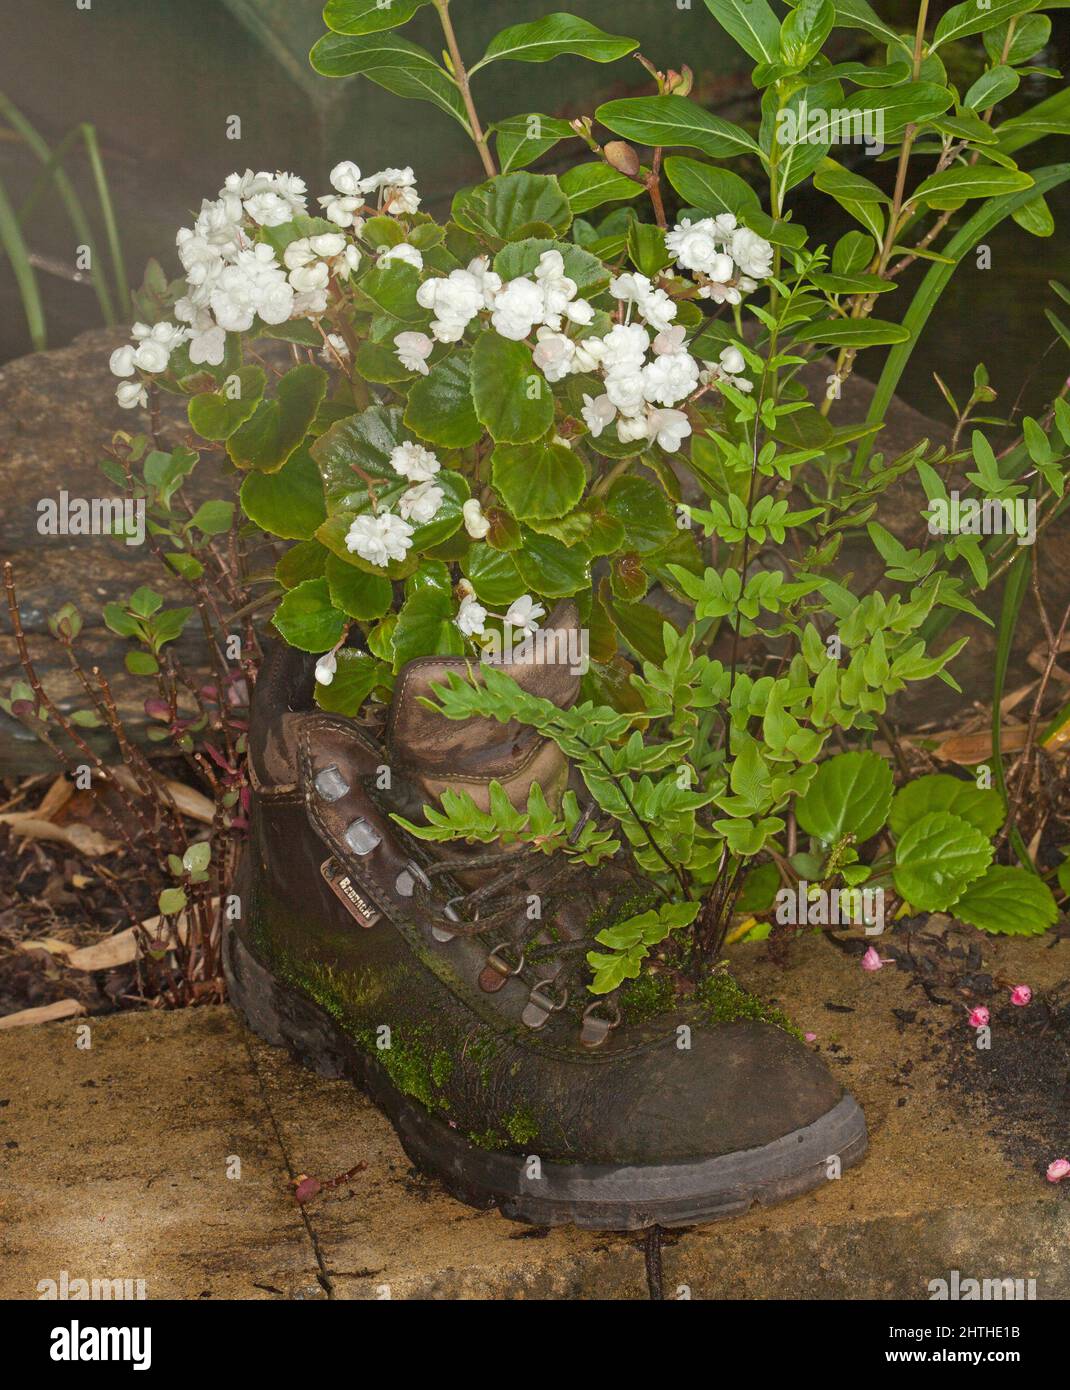 Container gardening - white flowers and foliage of bedding begonia, Begonia semperflorens and fern growing together in old recycled leather boot Stock Photo